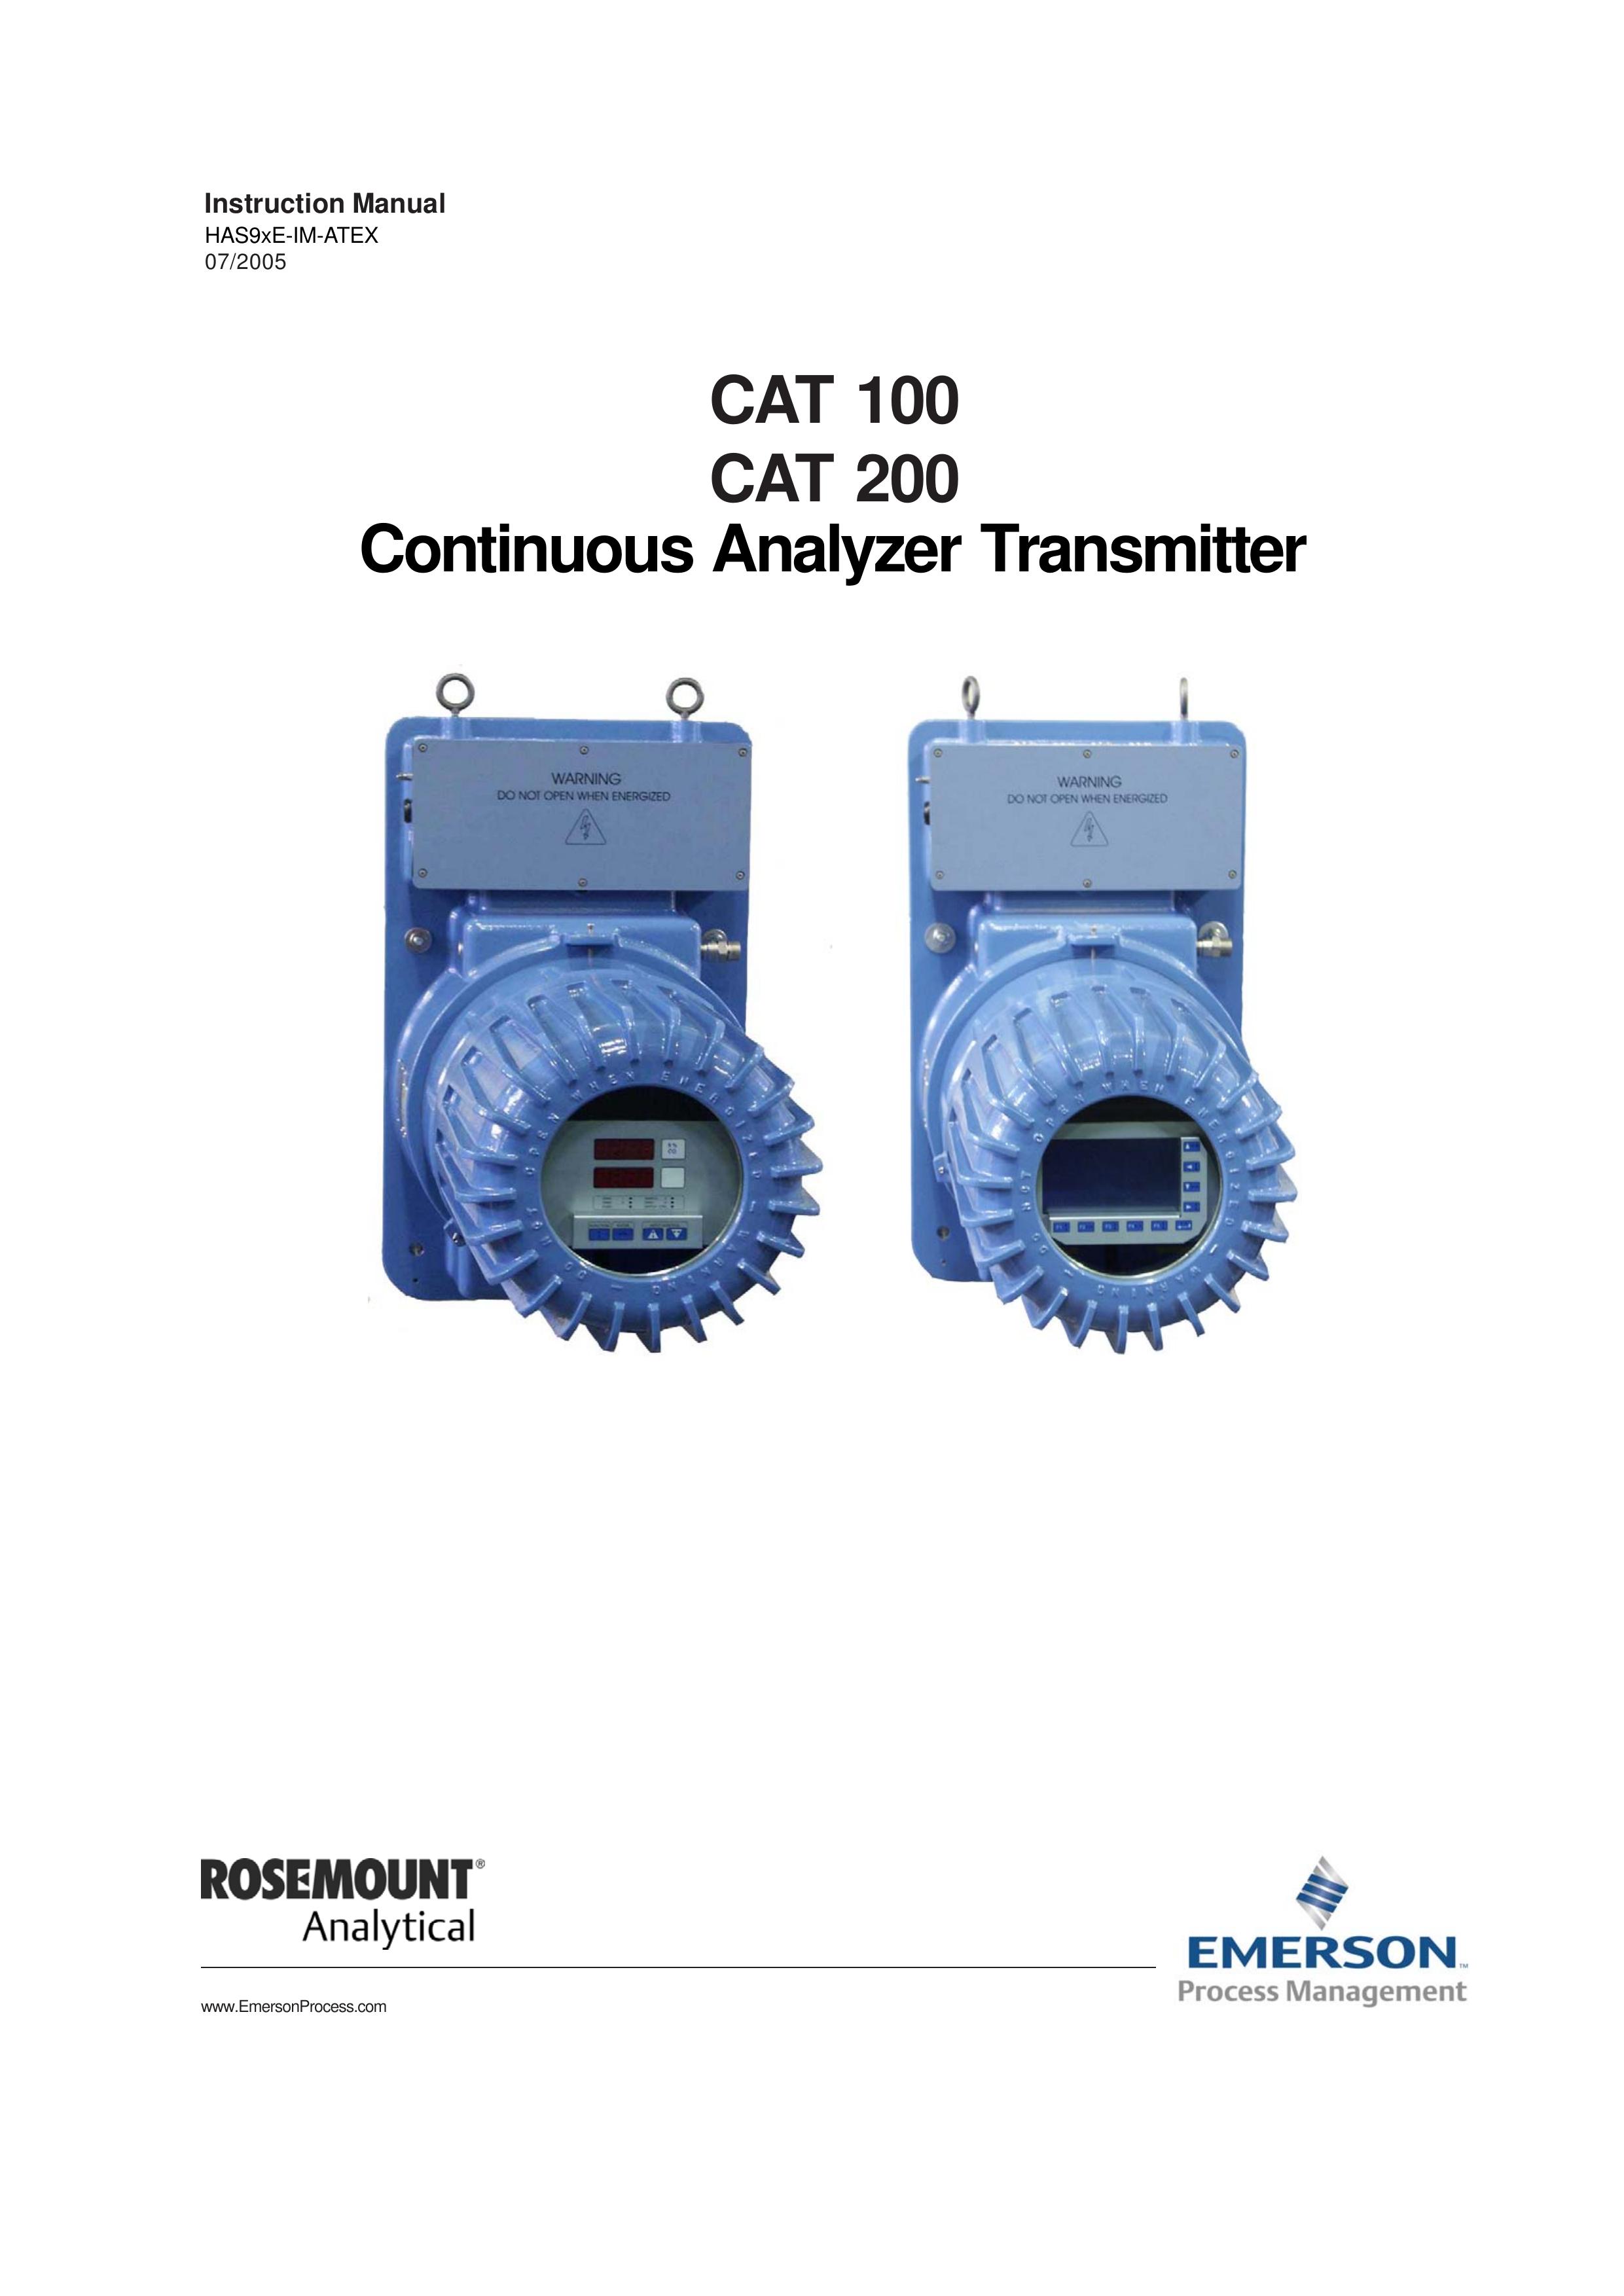 Emerson CAT 200 Pacemaker User Manual